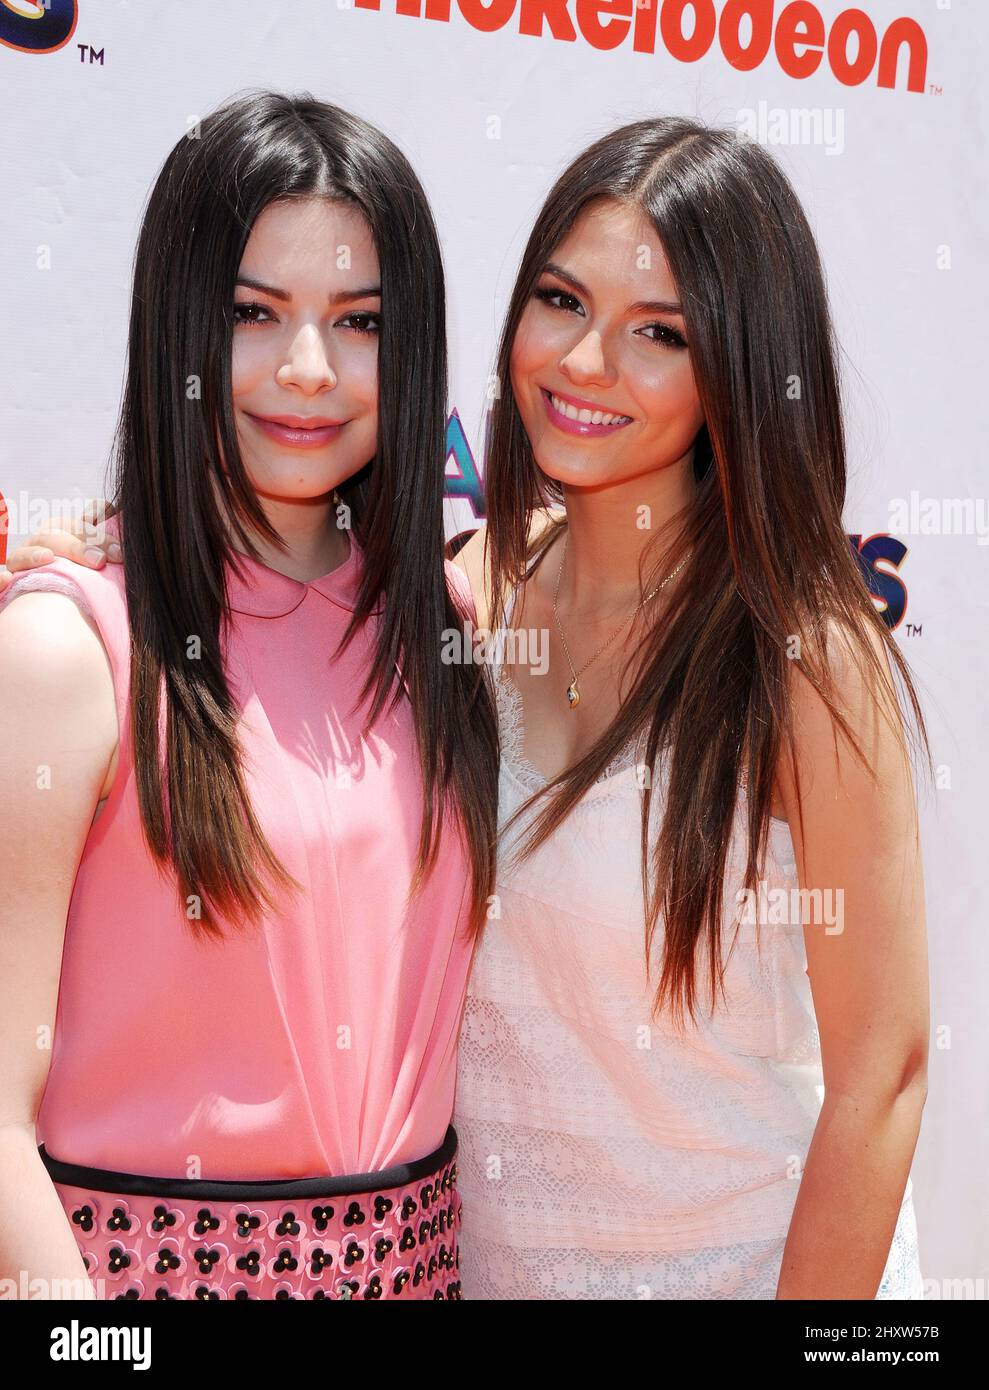 Miranda Cosgrove and Victoria Justice during the 'iParty With Victorious' Special Screening Event held at The Lot, California Stock Photo